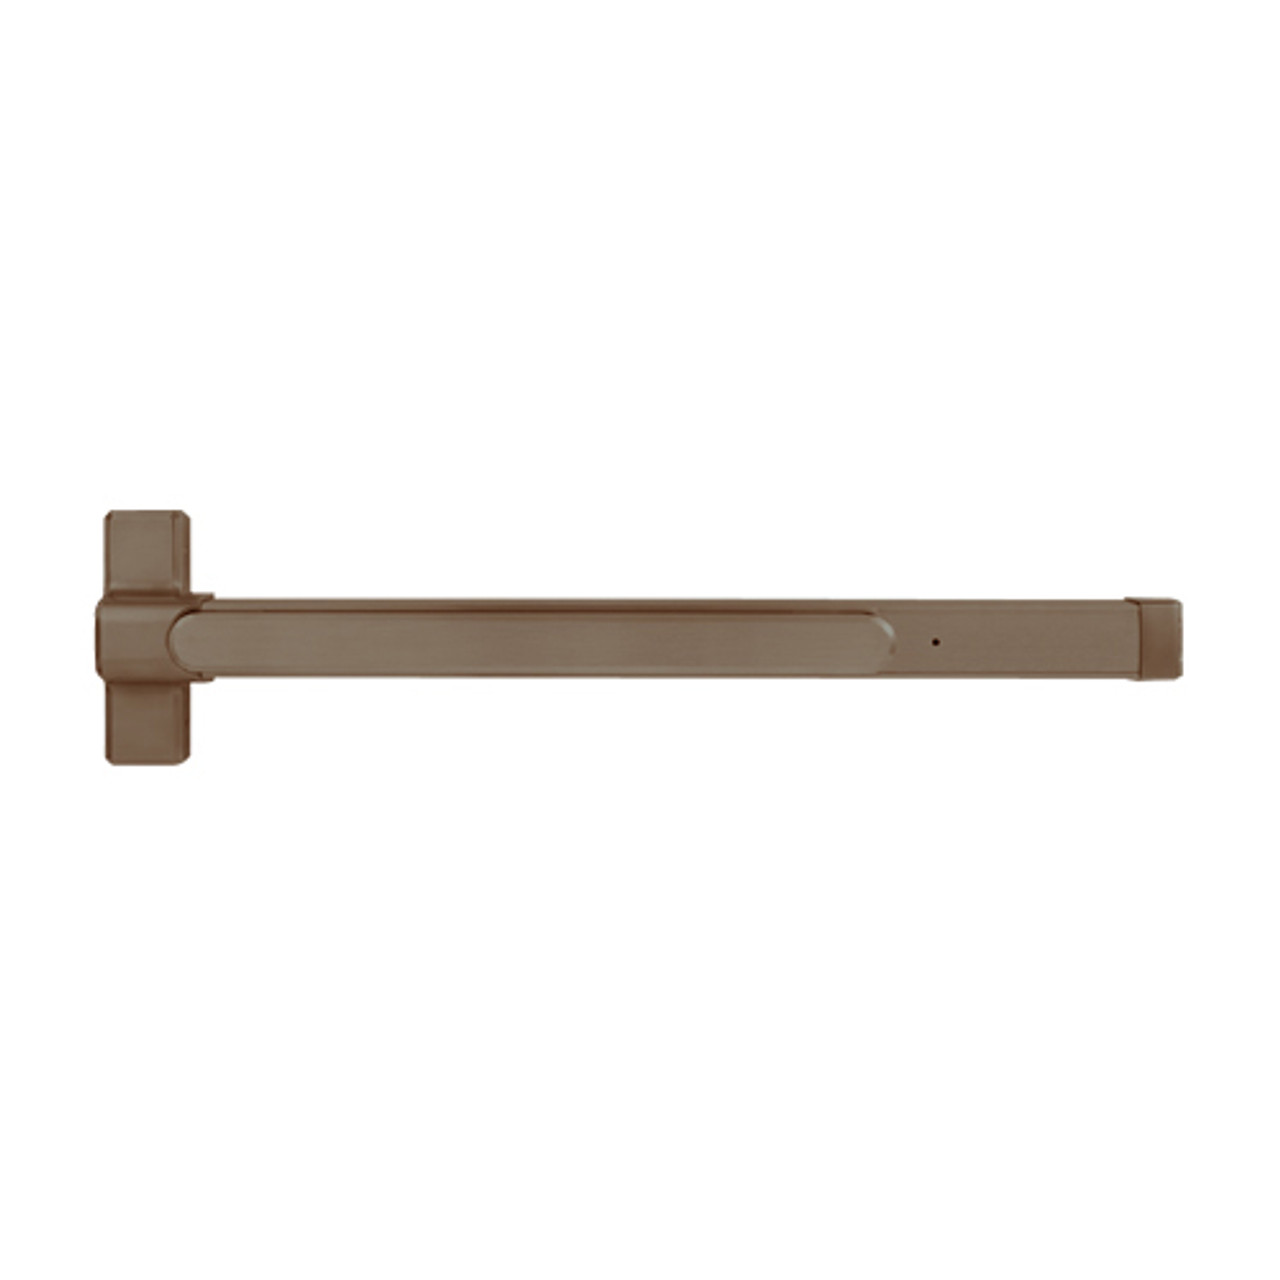 QED117LRX-48-7-313AN Stanley QED100 Series Heavy Duty Surface Vertical Rod Hex Dog Exit Device in Anodized Duranodic Bronze Finish